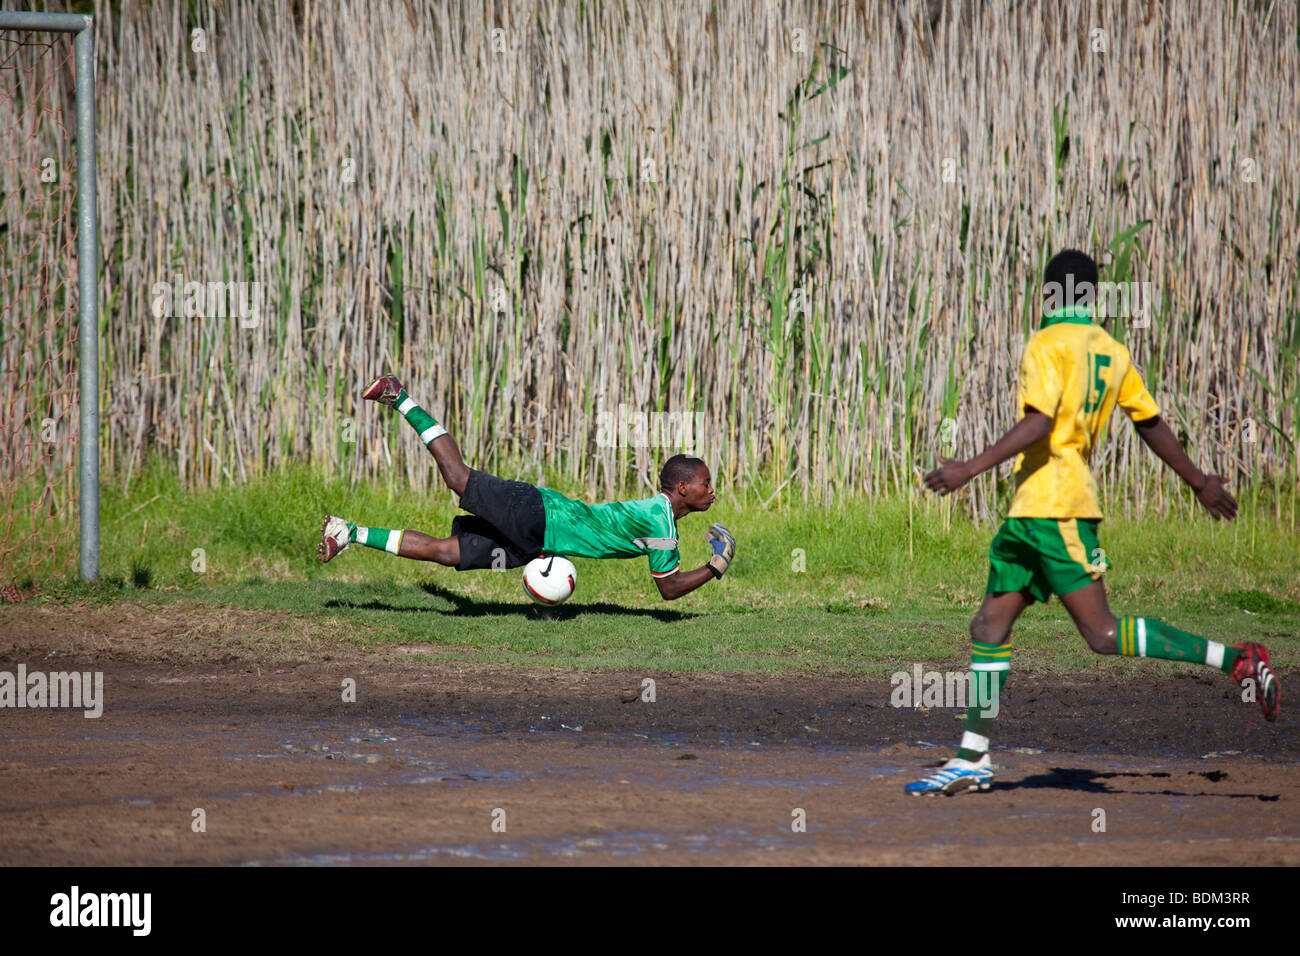 Local Soccer Match, Hout Bay, South Africa Stock Photo